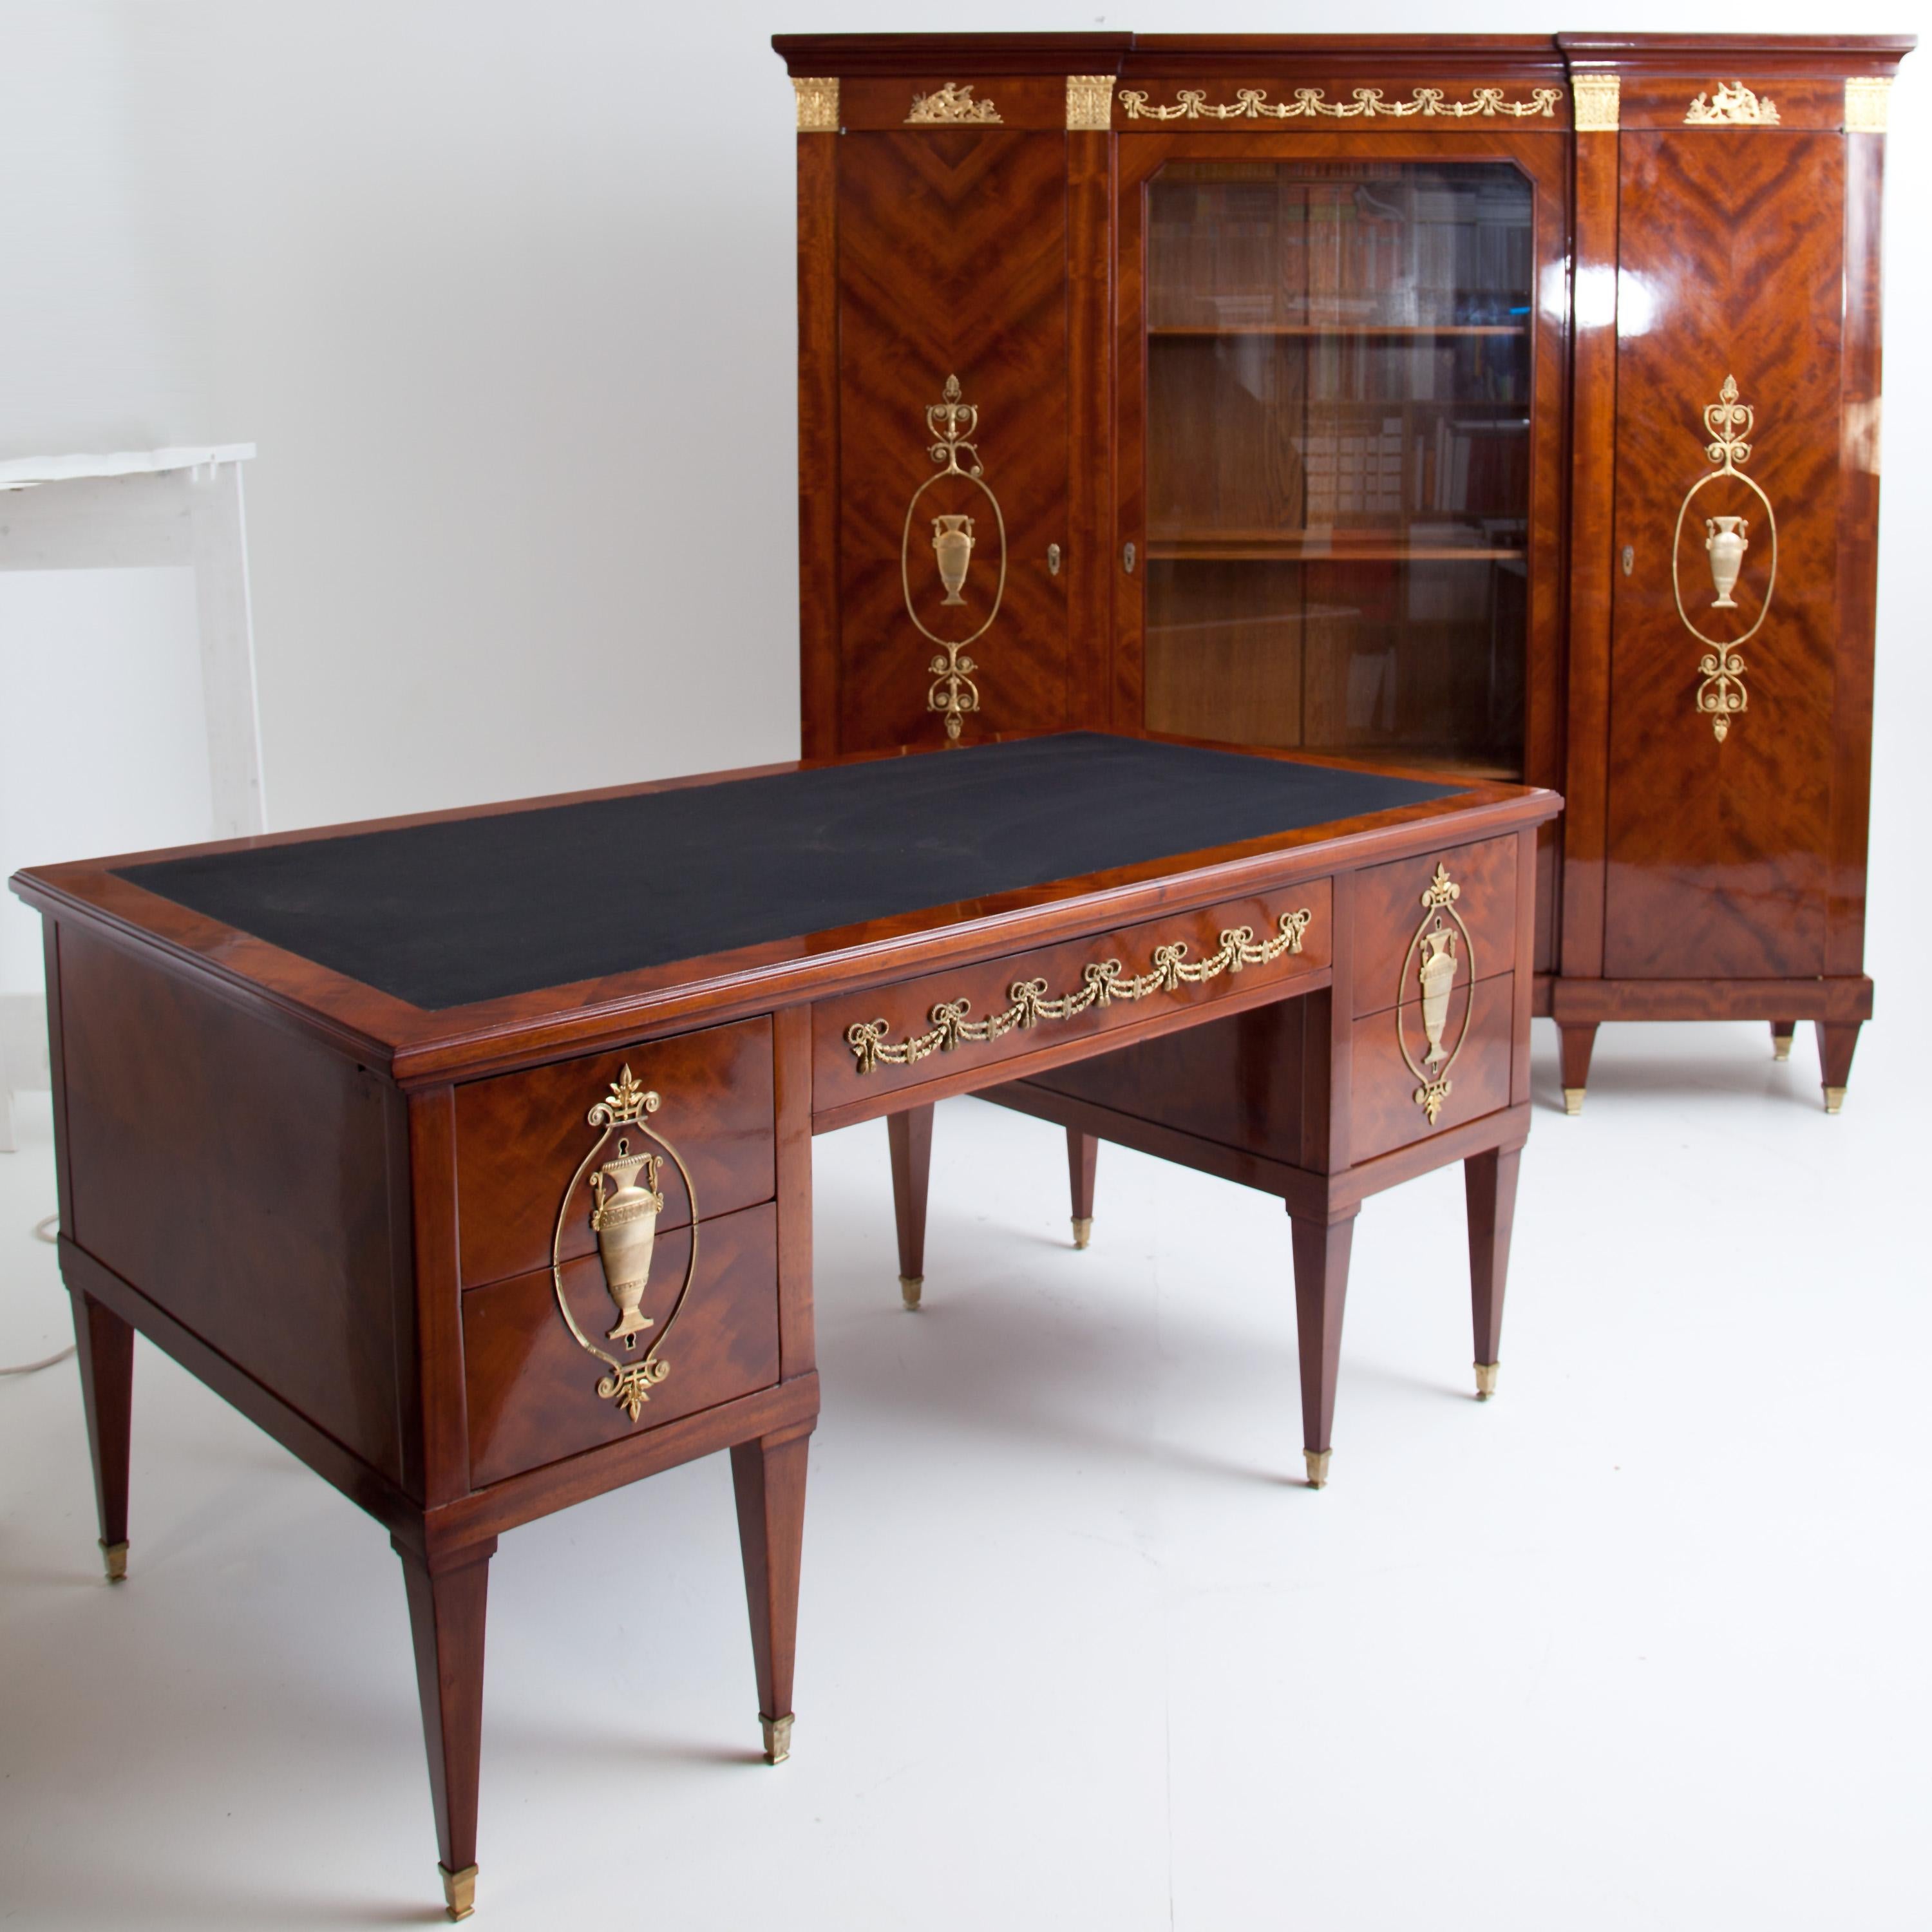 Large Empire style, mahogany veneered desk. The desk stands on tall square legs with brass sabots and features gilded Empire style appliqués in the form of urns, arabesques and festoons. The table top can be pulled out on both sides and is covered